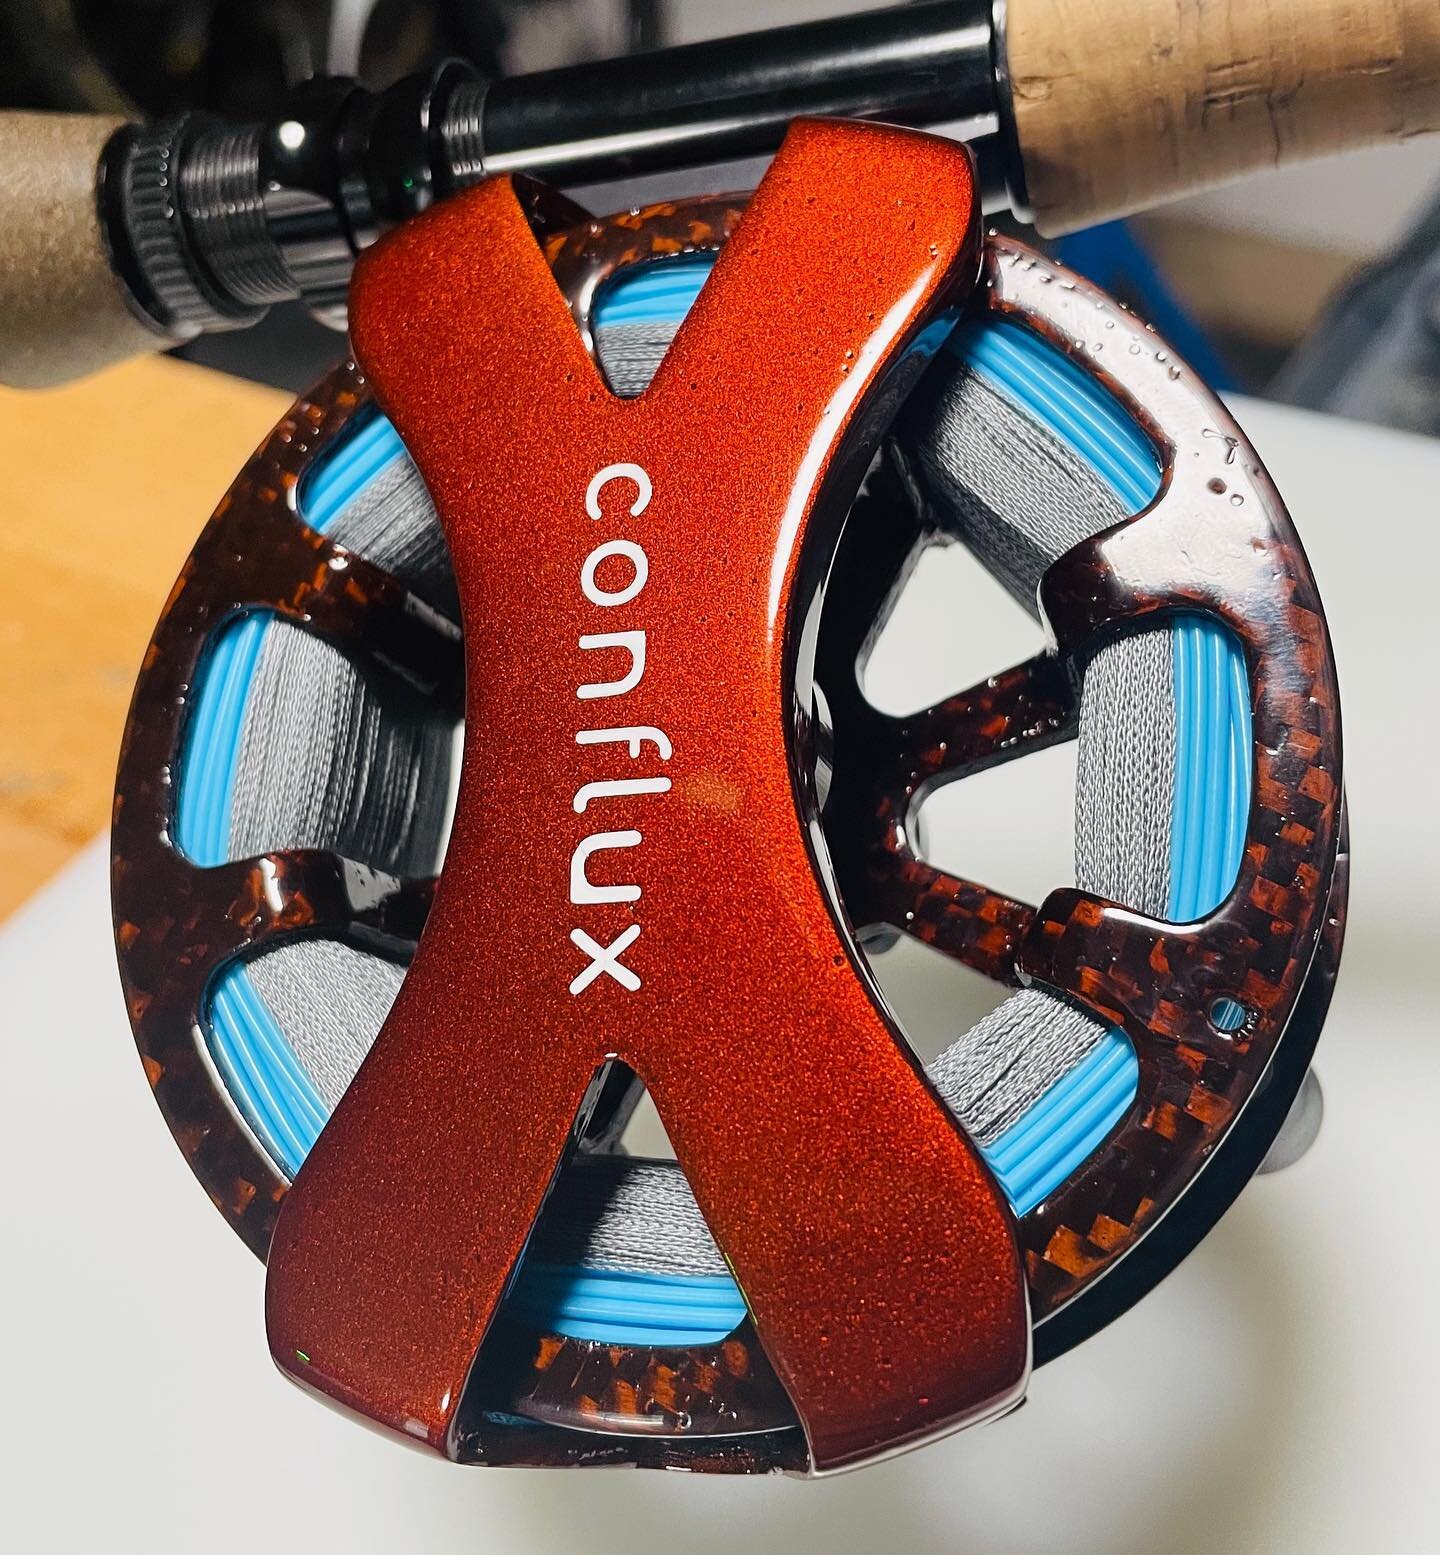 I always build my favourite colours first.

There&rsquo;s nothing quite like the Conflux Slash 7/8. Full carbon frame and spool for unmatched beauty and strength. 

#flyfishing #flyreel #confluxreels #flyfishingcanada🇨🇦 #handmade #madeincanada